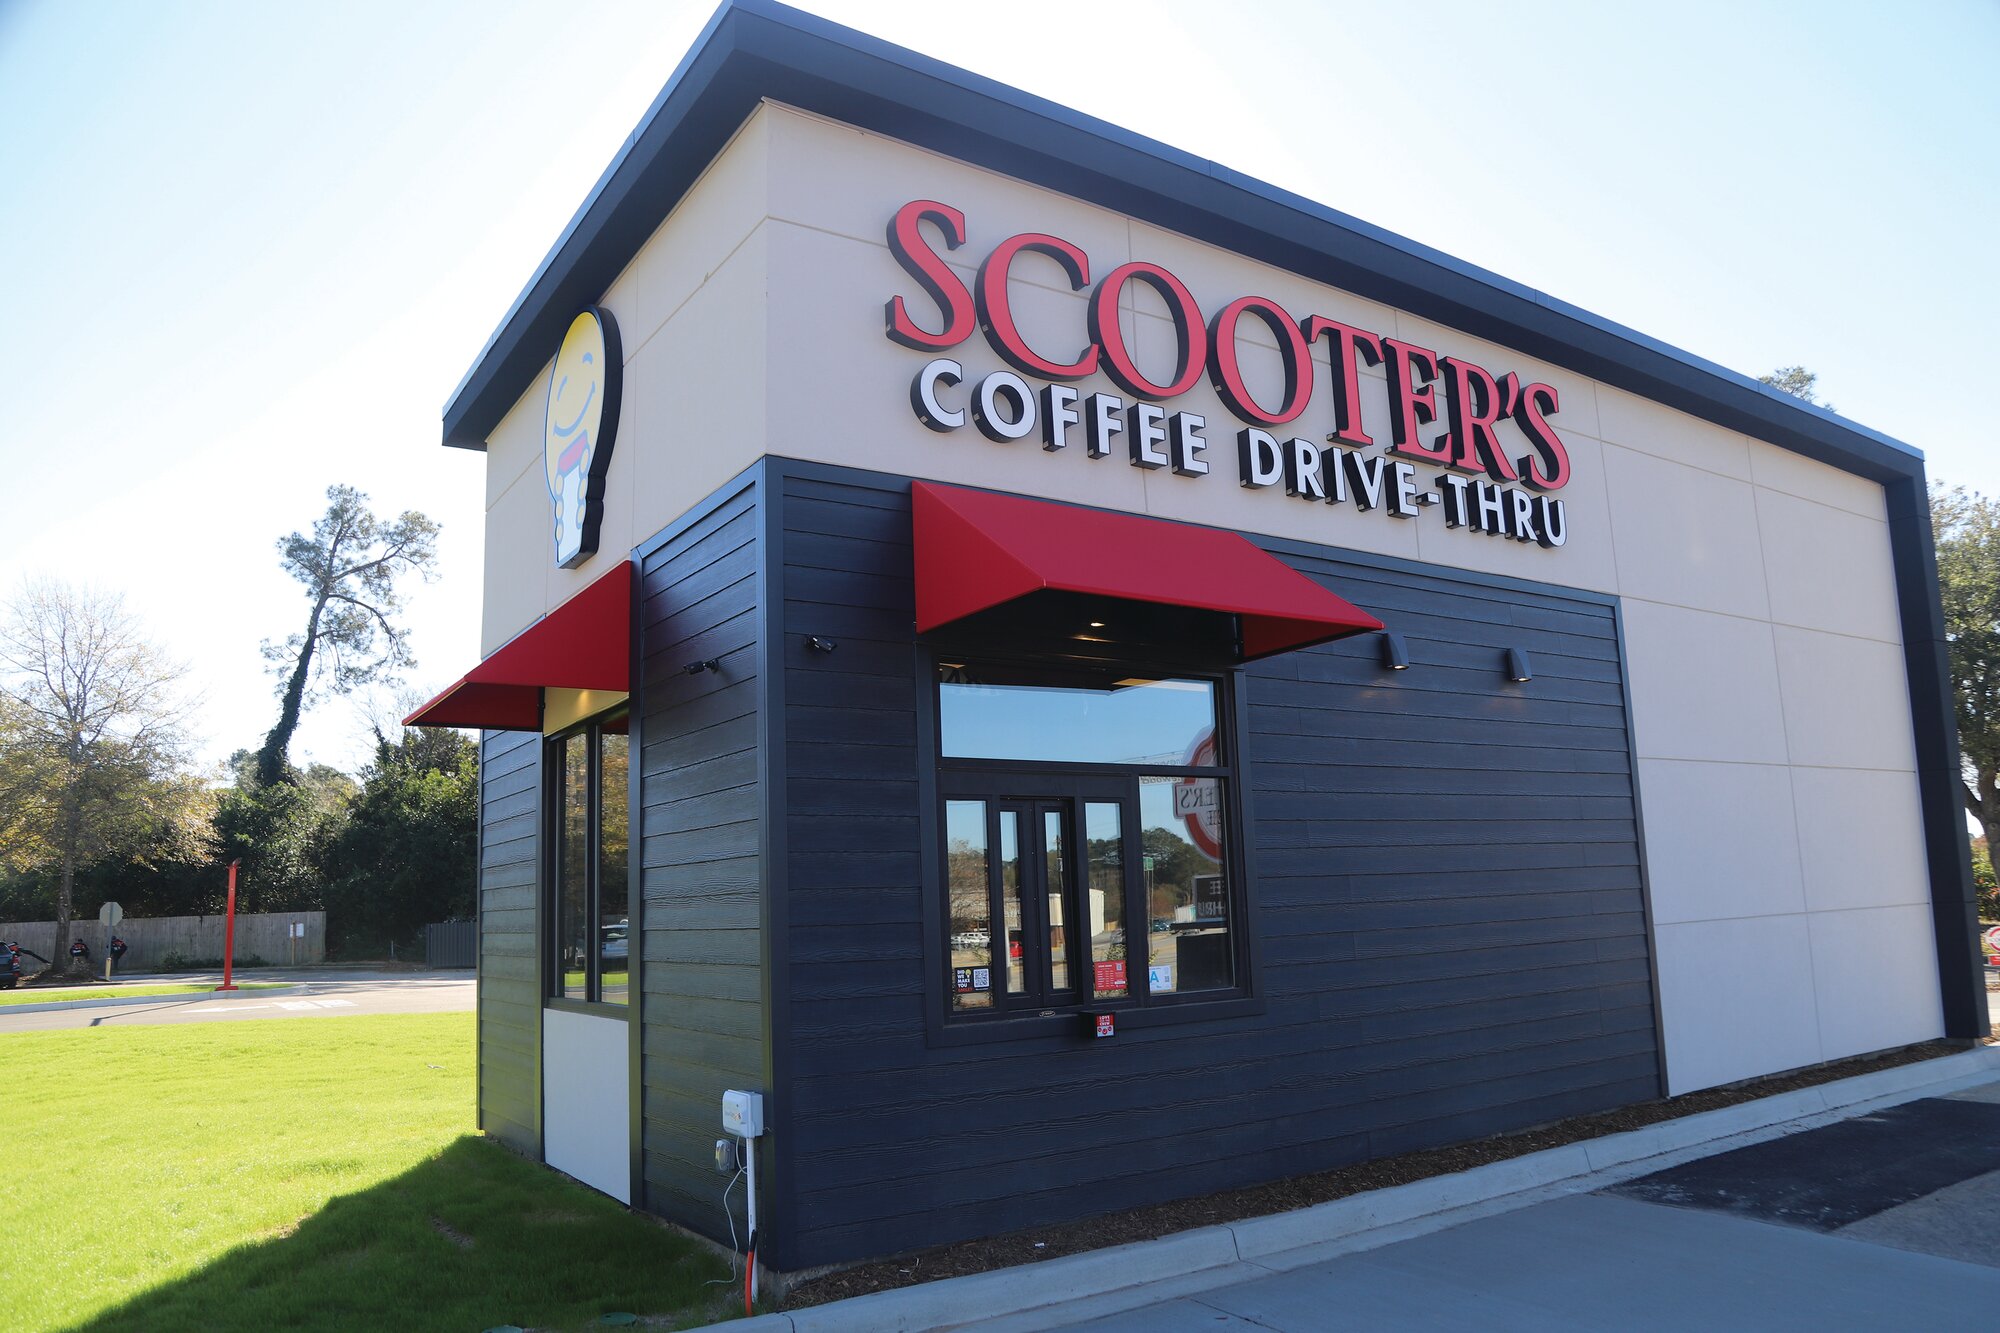 Scooter's Coffee Drive-Thru at 481 Pinewood Road will open for business on Monday.